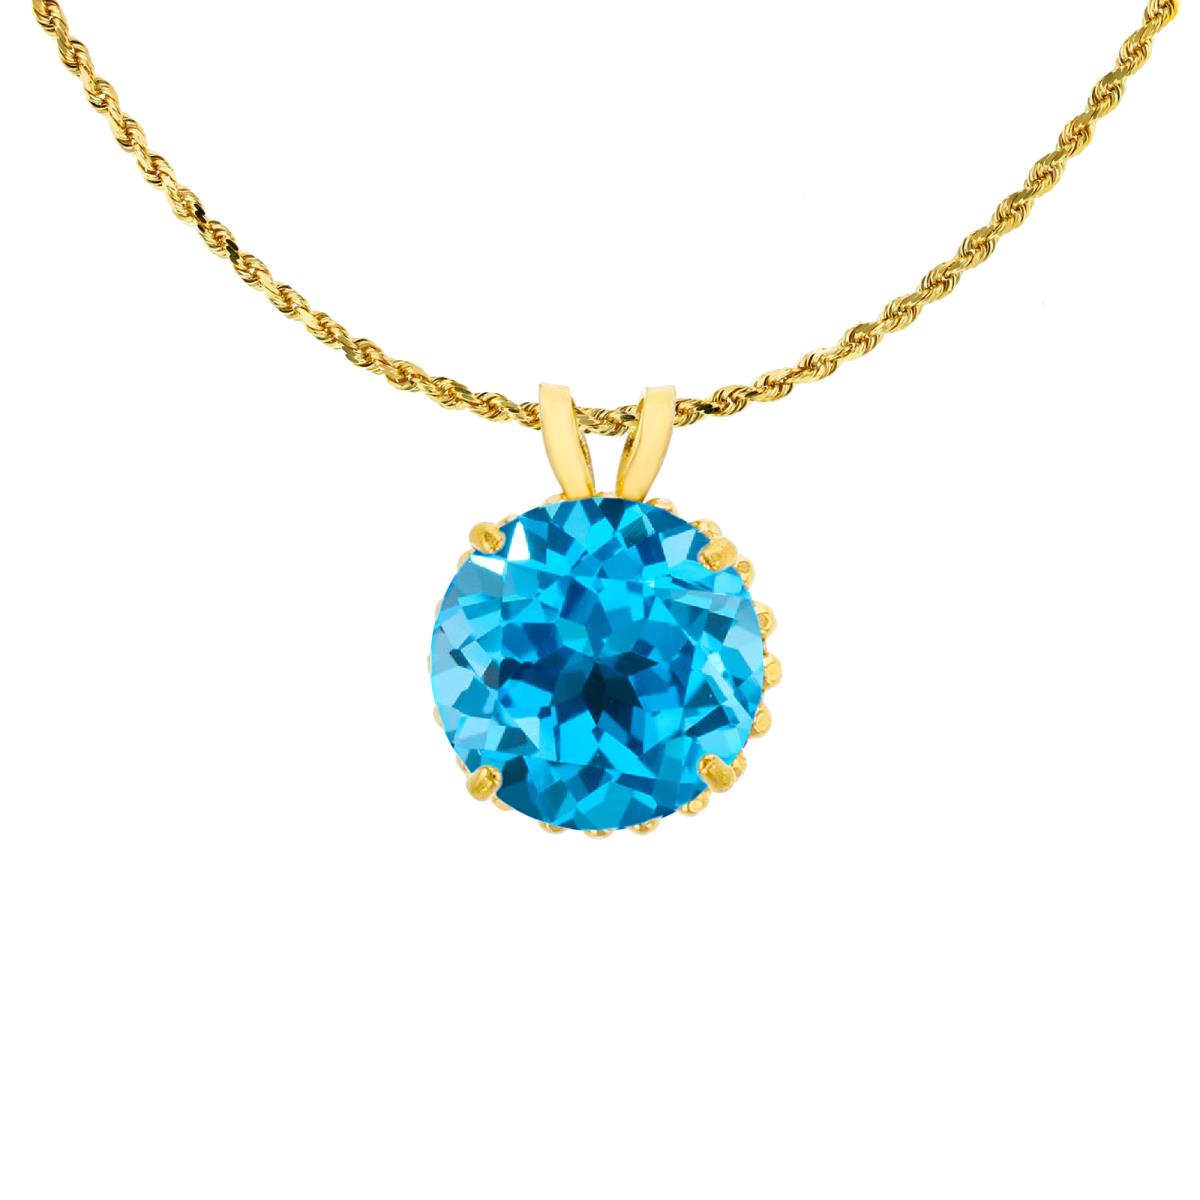 14K Yellow Gold 7mm Rd Cut Swiss Blue Topaz with Bead Frame Rabbit Ear 18" Rope Chain Necklace